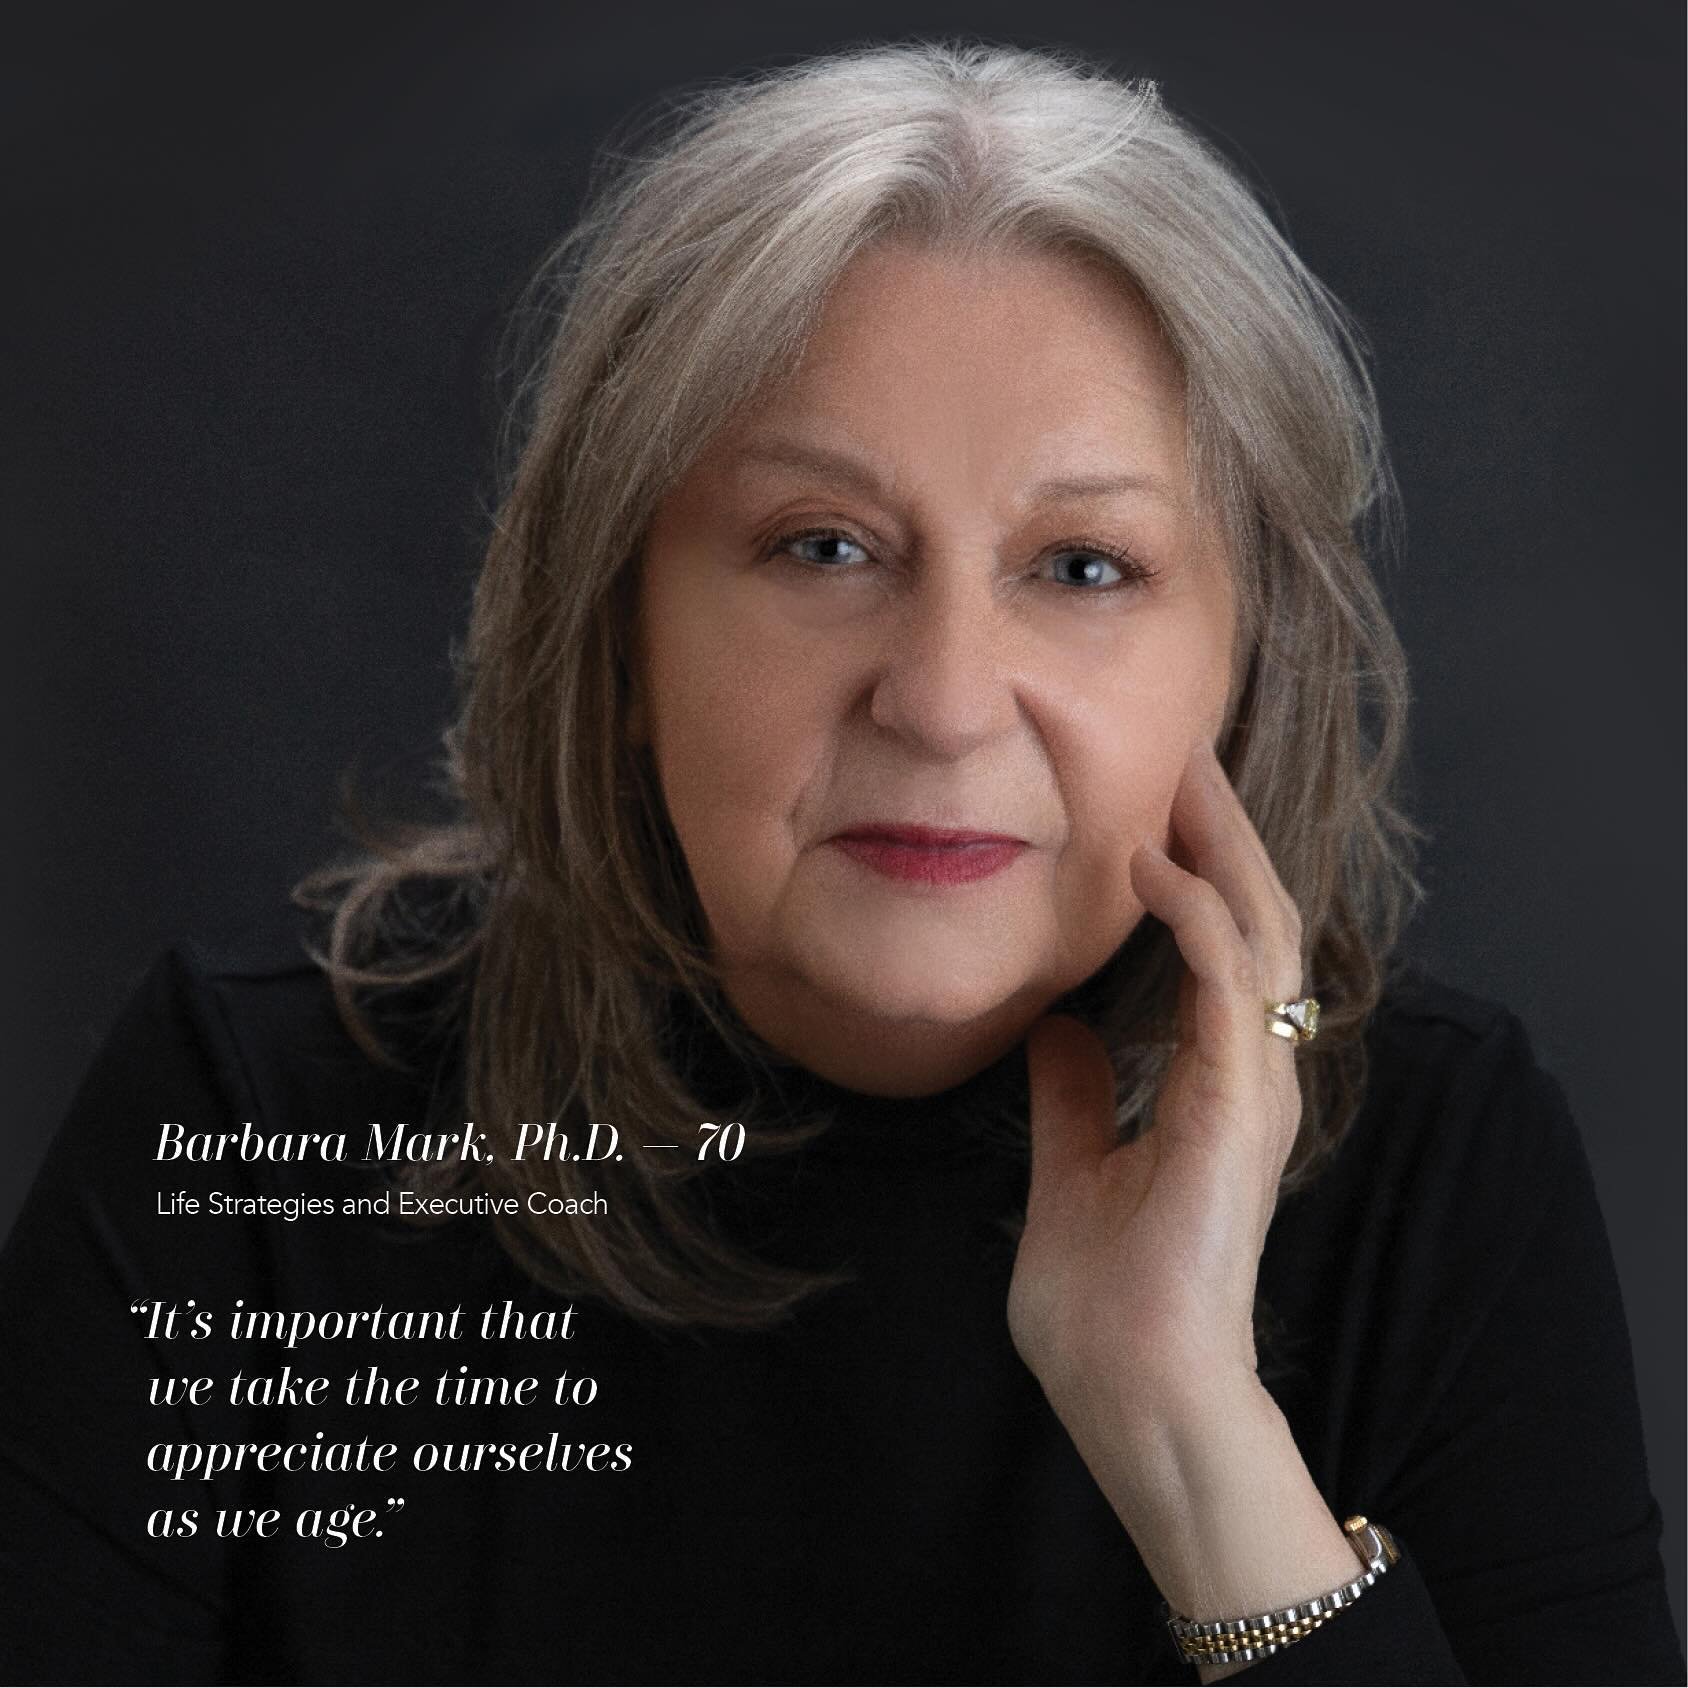 🎉👏 Join us in celebrating Barbara Mark, inspiring participant in our 40 Over 40 &ldquo;Boss Babe&rdquo; Project! 

🌟As Barbara says, self-appreciation as we age becomes crucial, especially given the cultural pressures. Once we hit 40, there&rsquo;